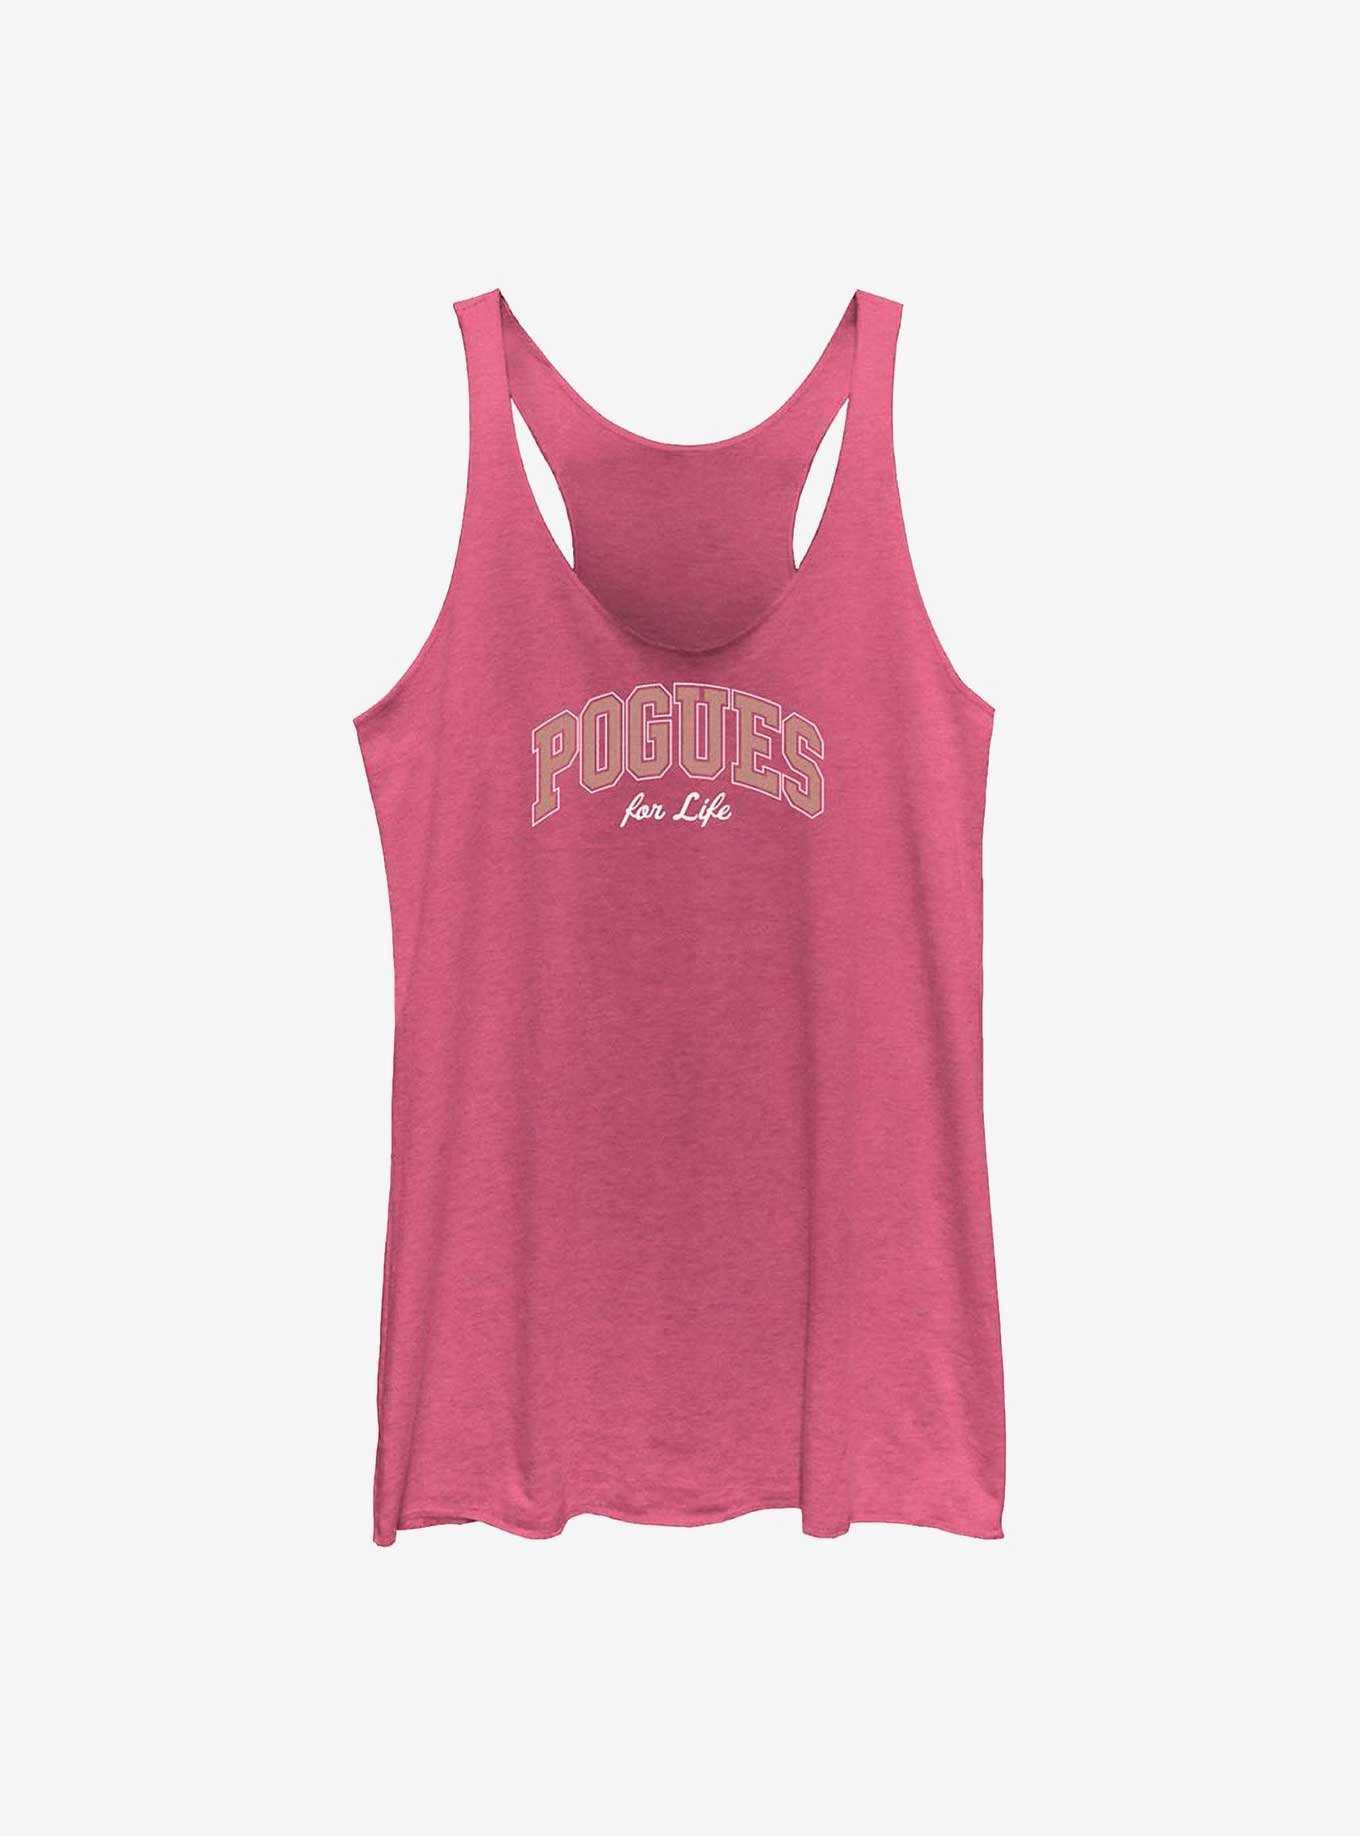 Outer Banks Pogues For Life Girls Tank, , hi-res